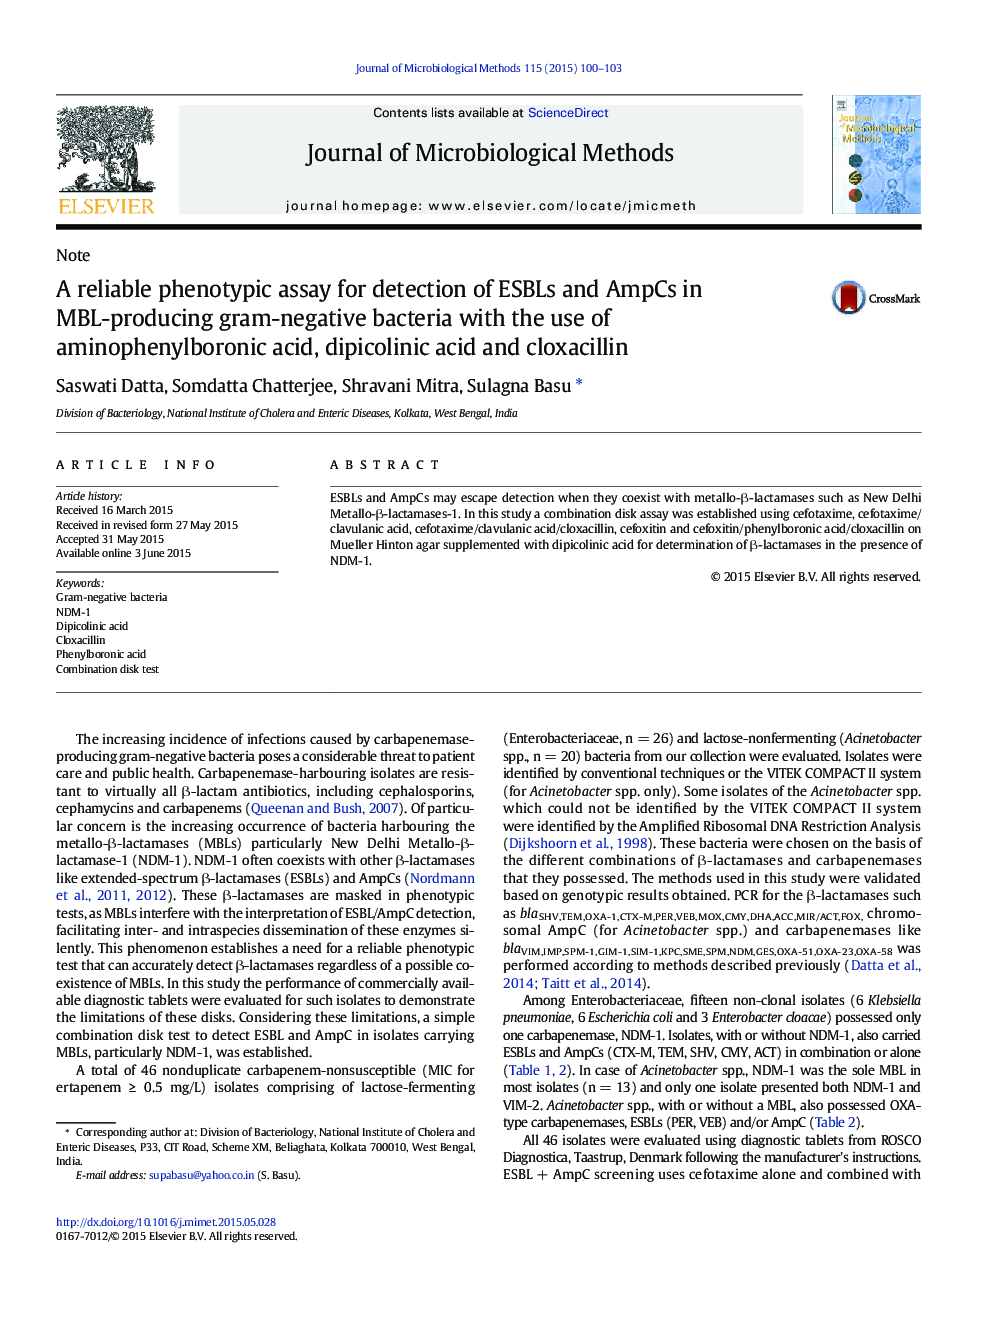 A reliable phenotypic assay for detection of ESBLs and AmpCs in MBL-producing gram-negative bacteria with the use of aminophenylboronic acid, dipicolinic acid and cloxacillin